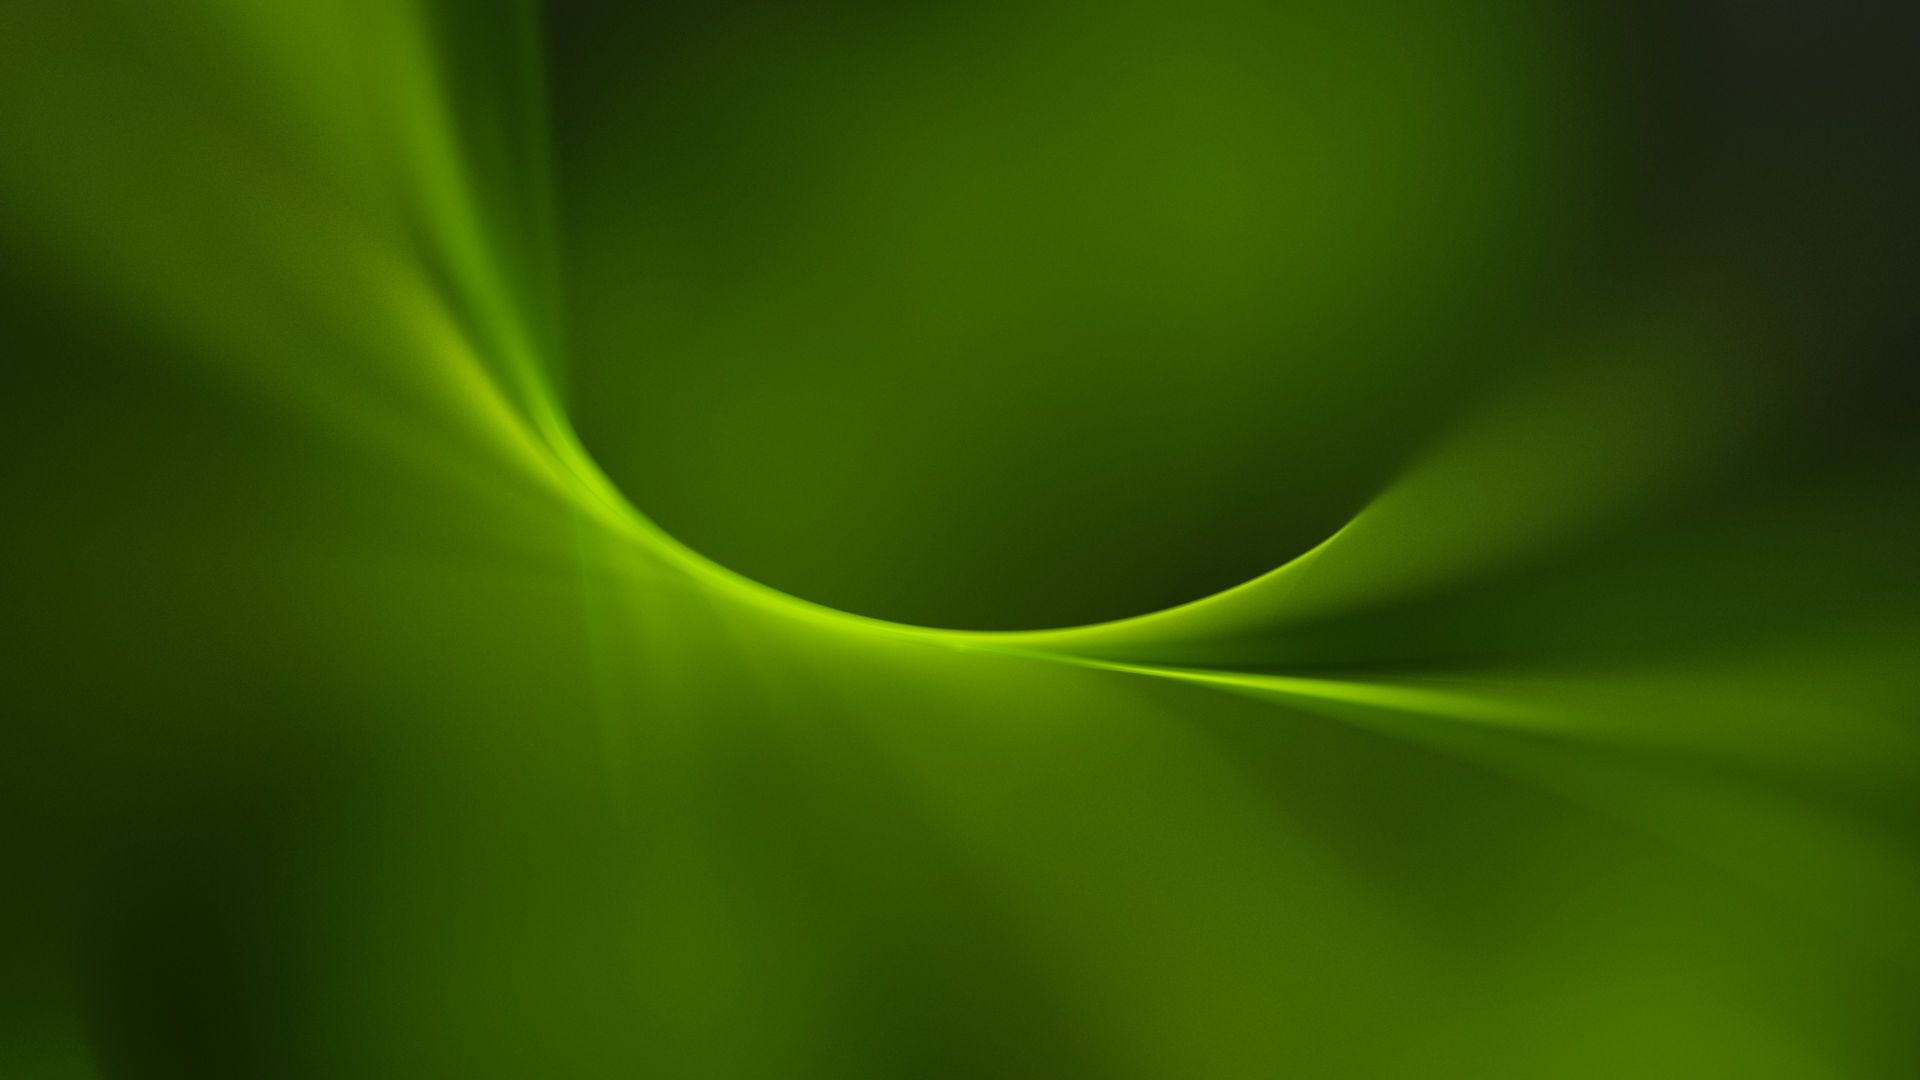 Wallpaper Simple, green curves, abstract, 4k